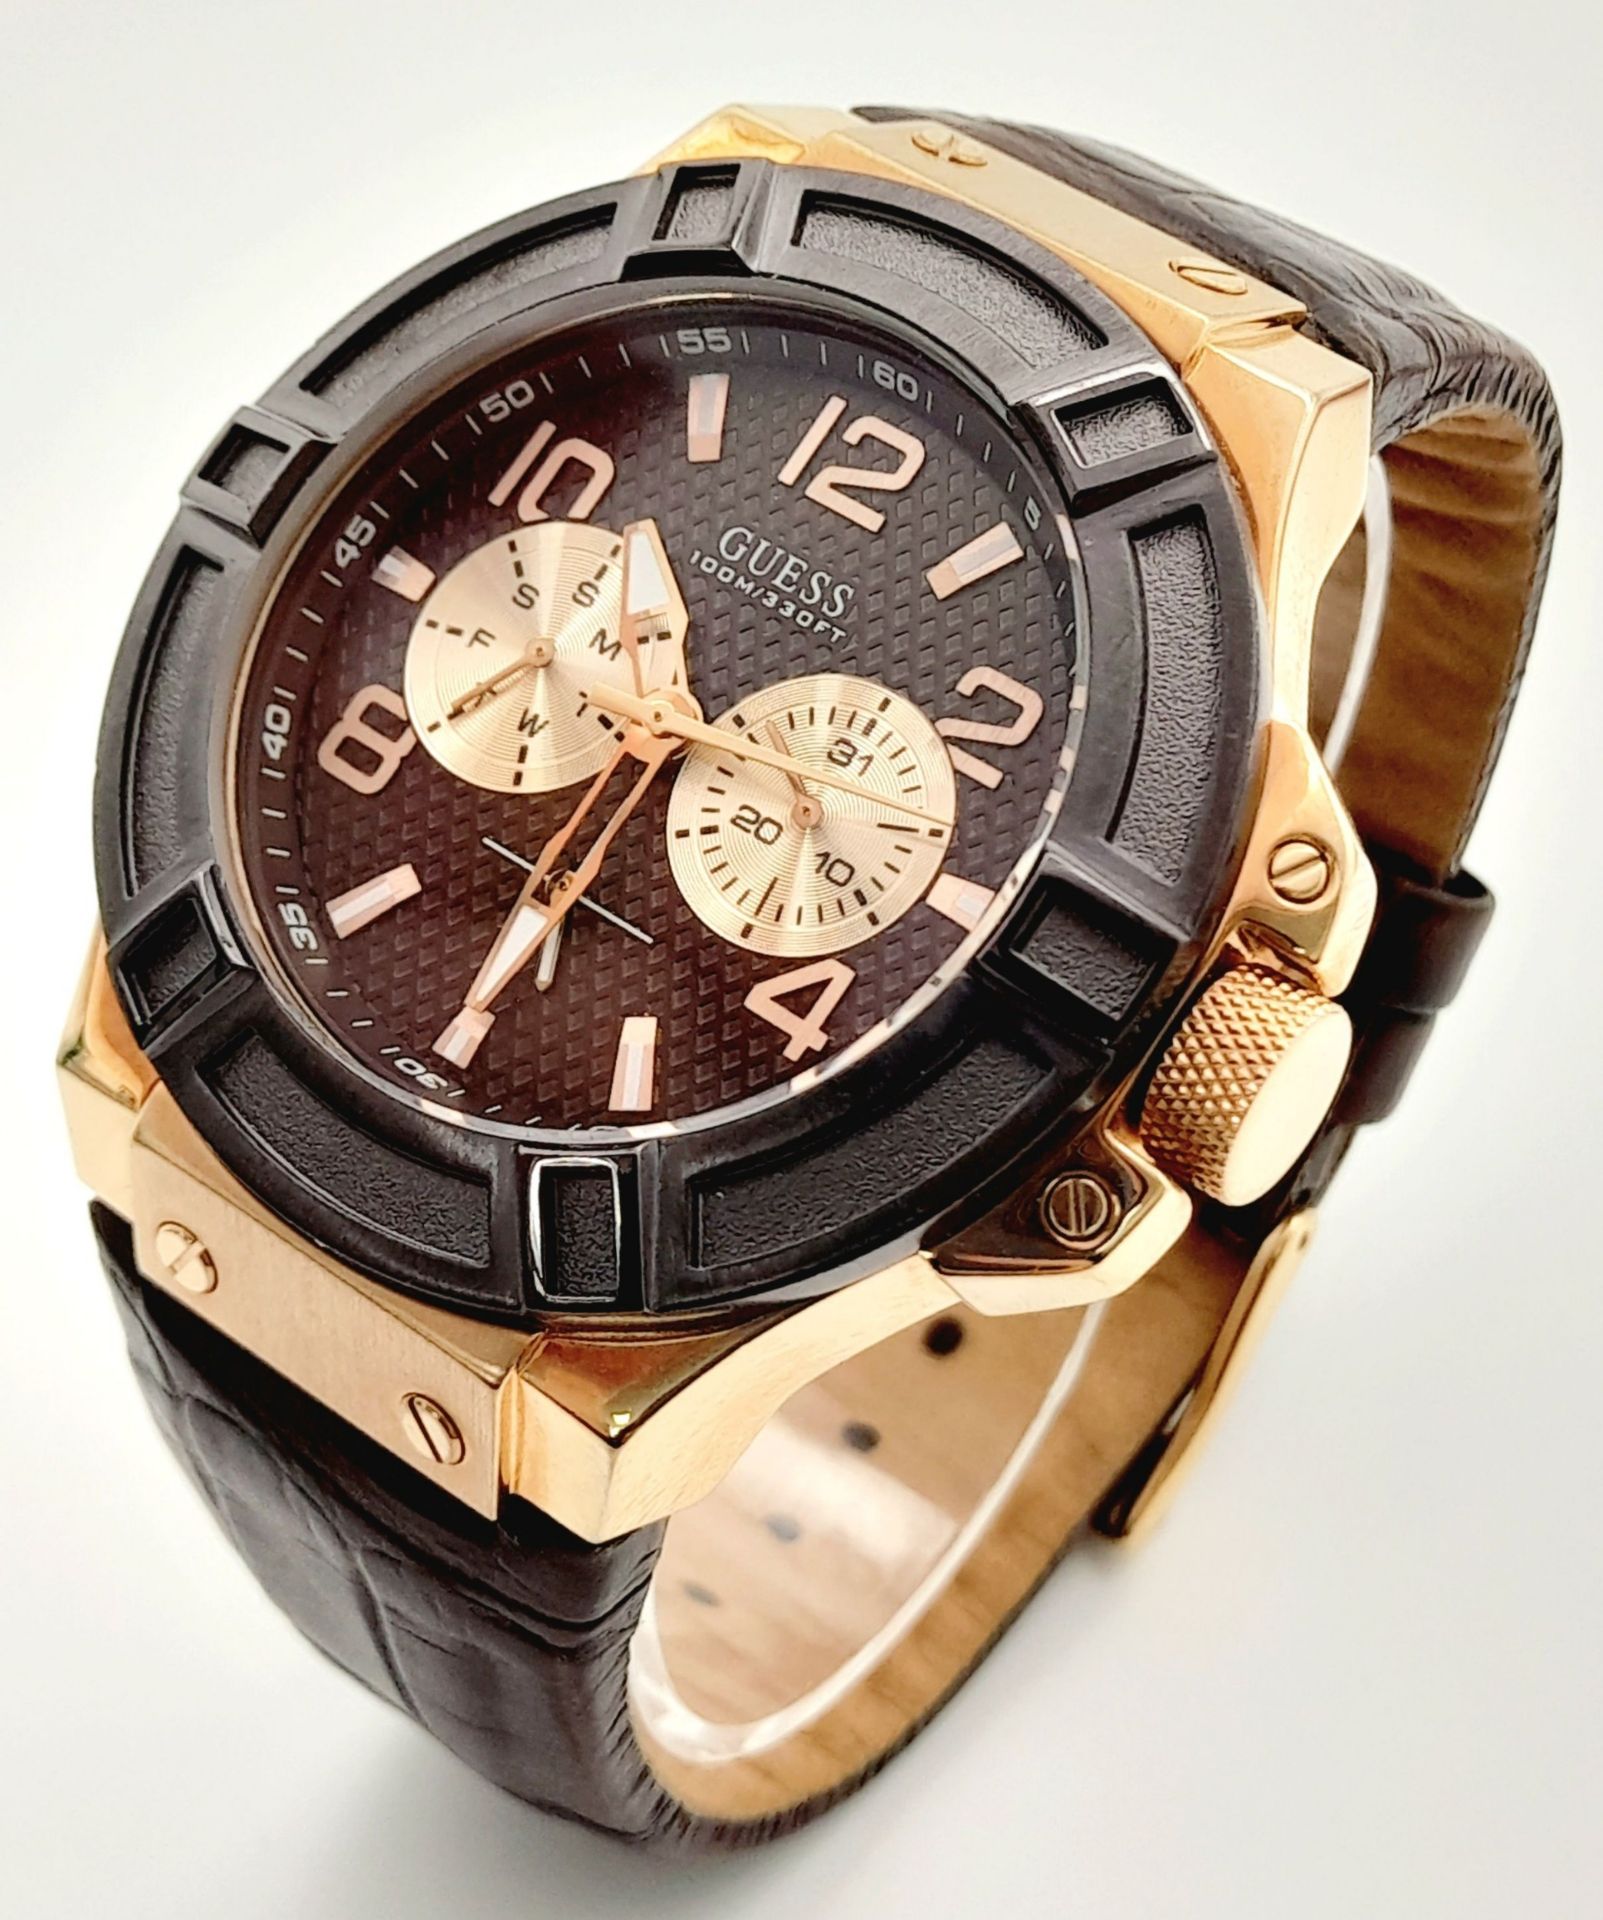 A Men’s Rose Gold-Toned Sports Fashion Watch by Guess (45mm Case). Full Working Order. - Image 2 of 6